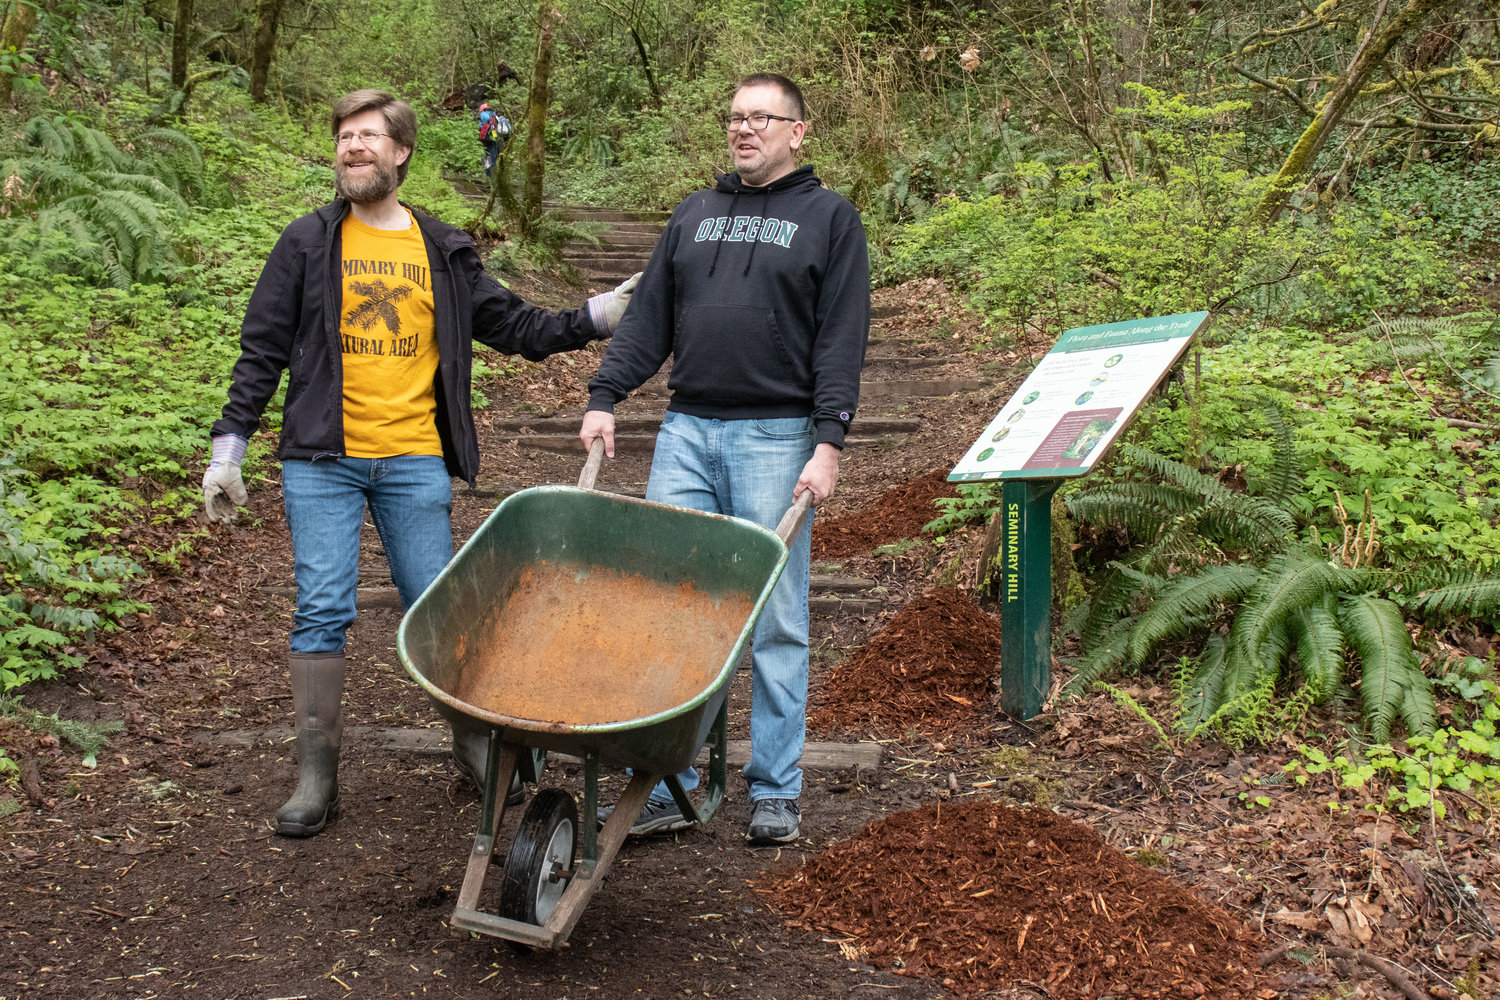 Brian Mittge and a volunteer unload bark chips on a trail during the Friends of the Seminary Hill Natural Area Earth Day Work Party in Centralia on Saturday.